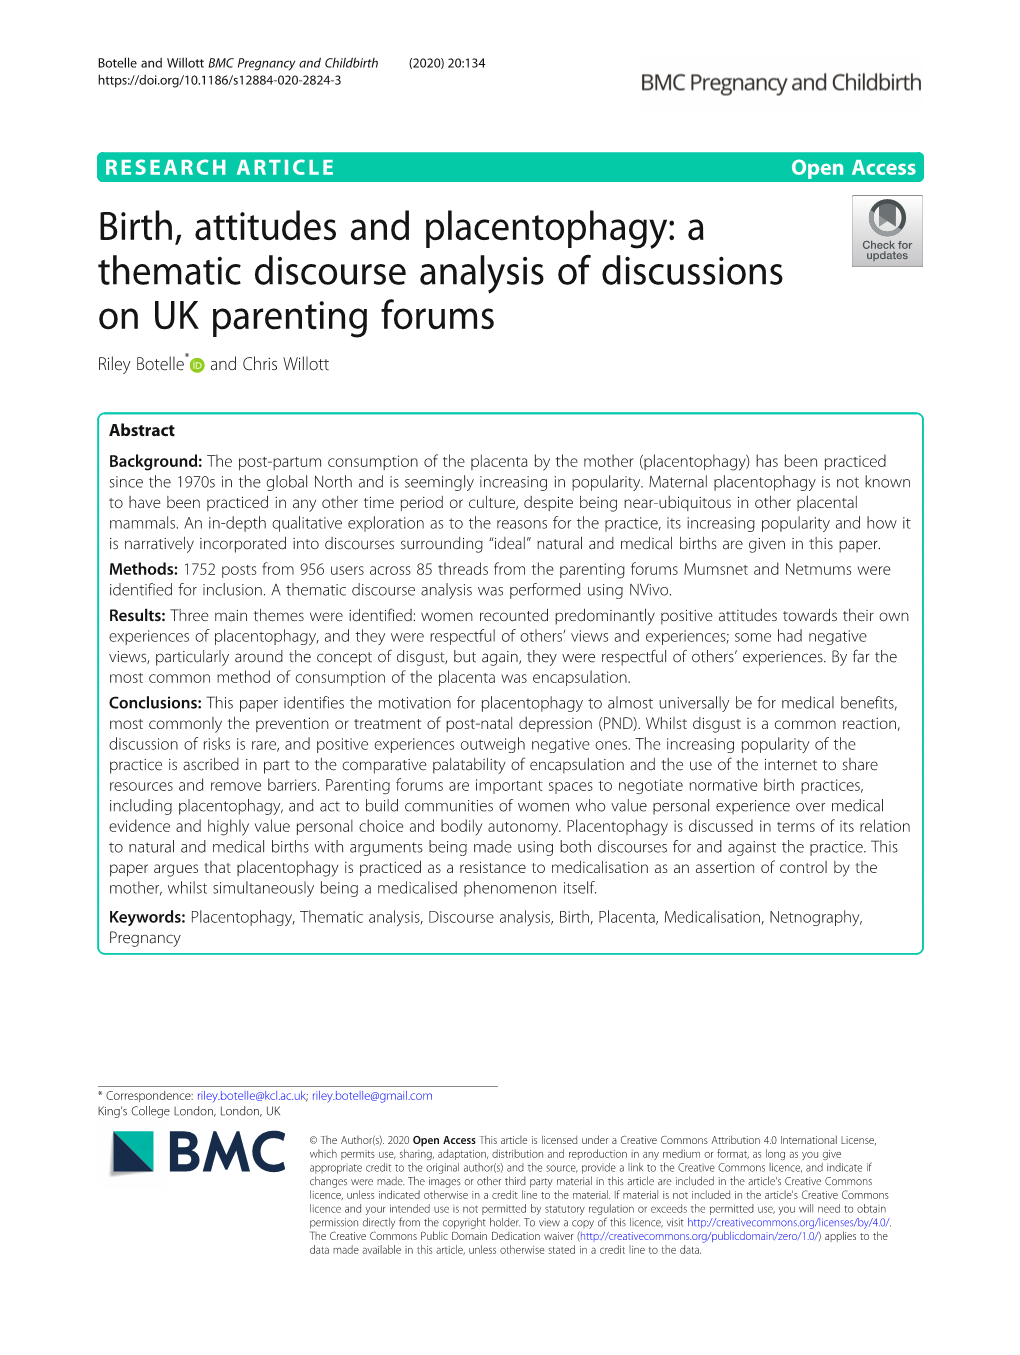 A Thematic Discourse Analysis of Discussions on UK Parenting Forums Riley Botelle* and Chris Willott